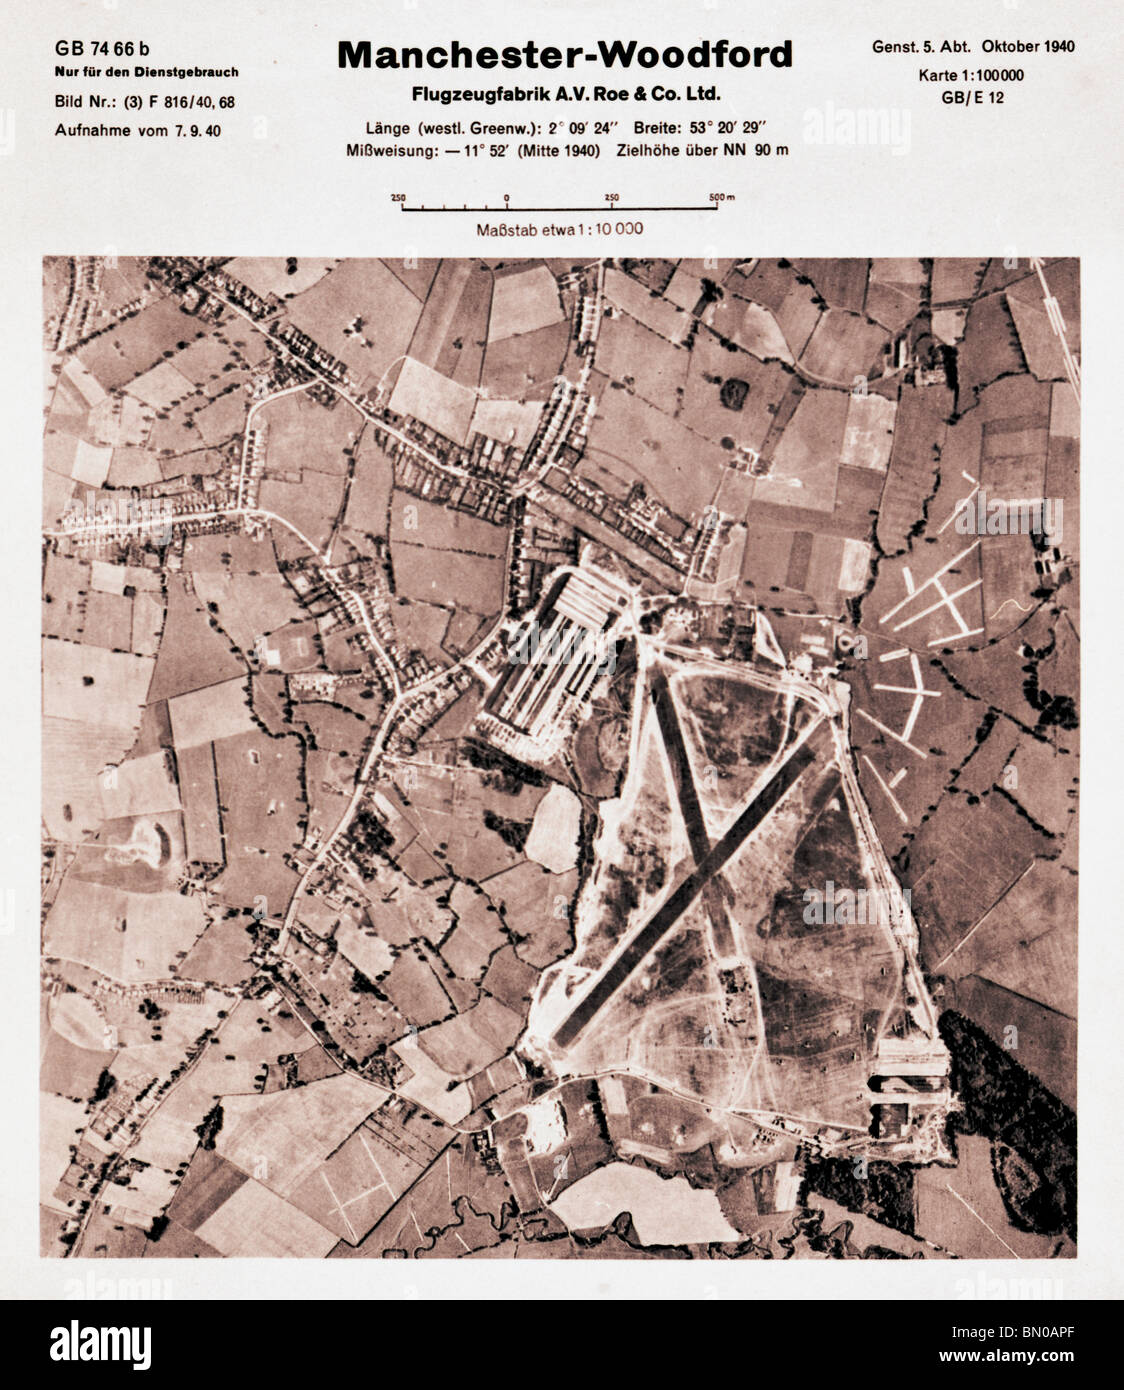 Woodford - Manchester 1940 Airfield RAF Aerodrome Fighter STation Luftwaffe Aerial Image Blitz Stock Photo